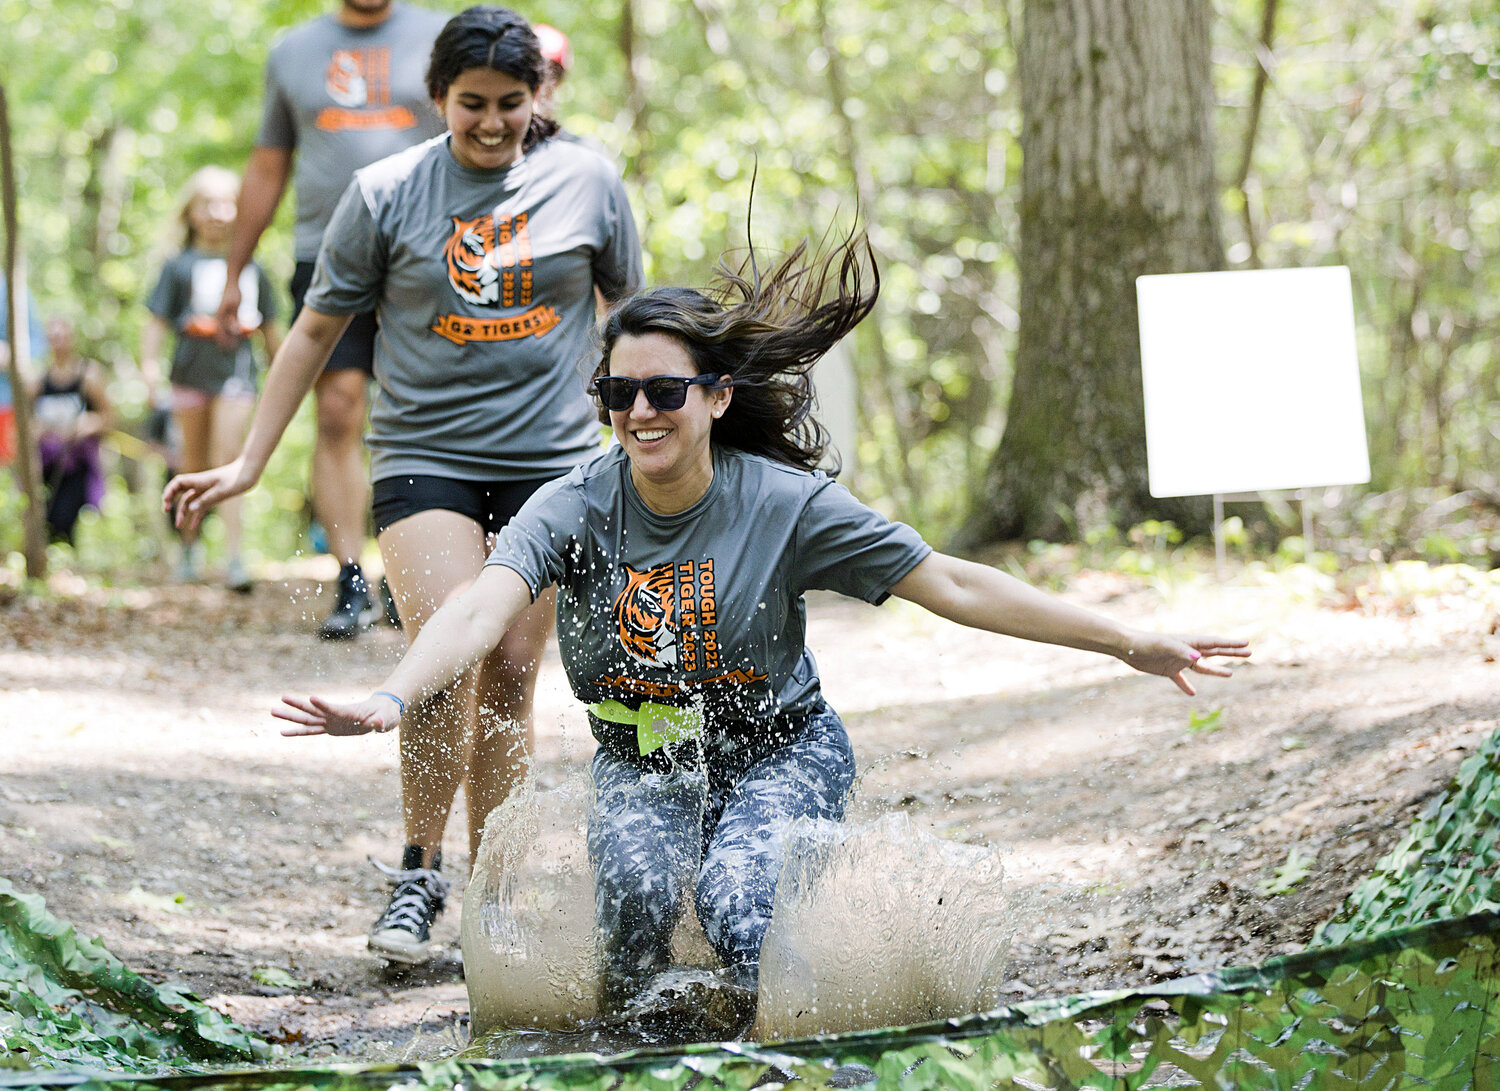 Karen Lanpher takes a dramatic leap into a mud pit while participating in Hampden Meadow's "Tough Tiger" event, Sunday.